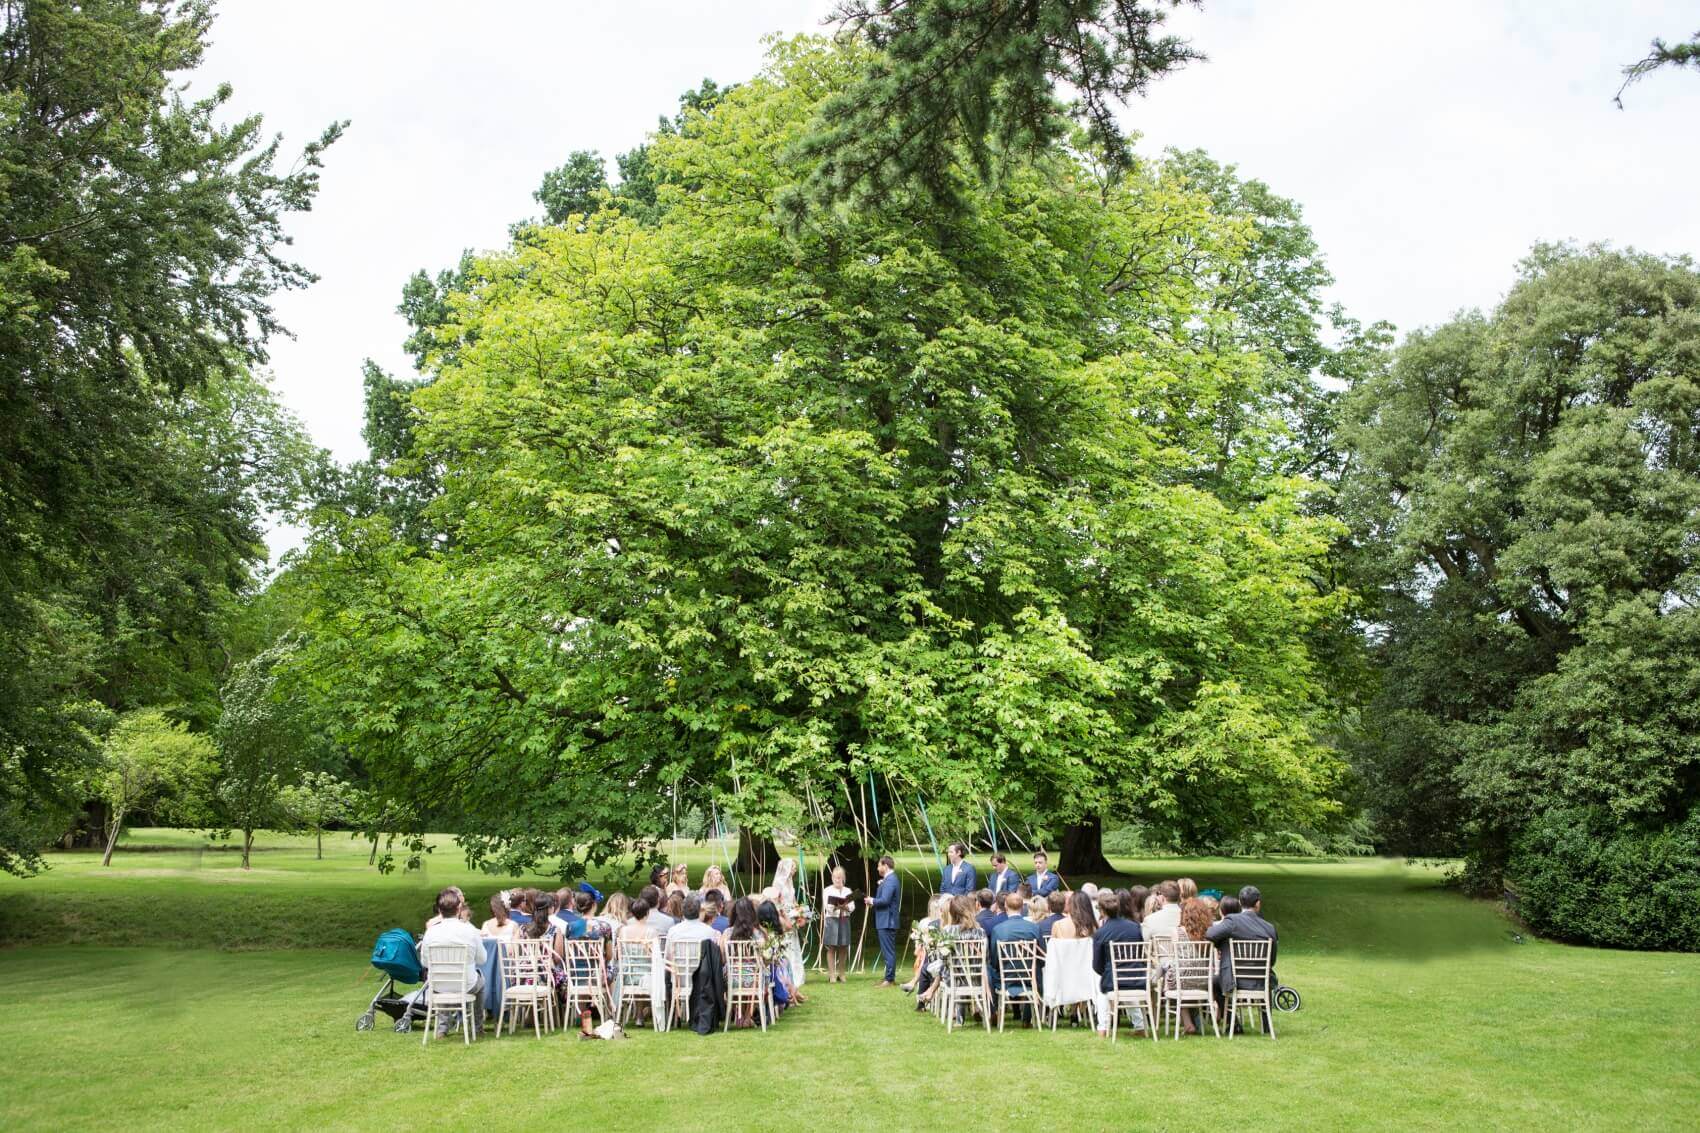 Outdoor wedding ceremony under an old tree with ribbons